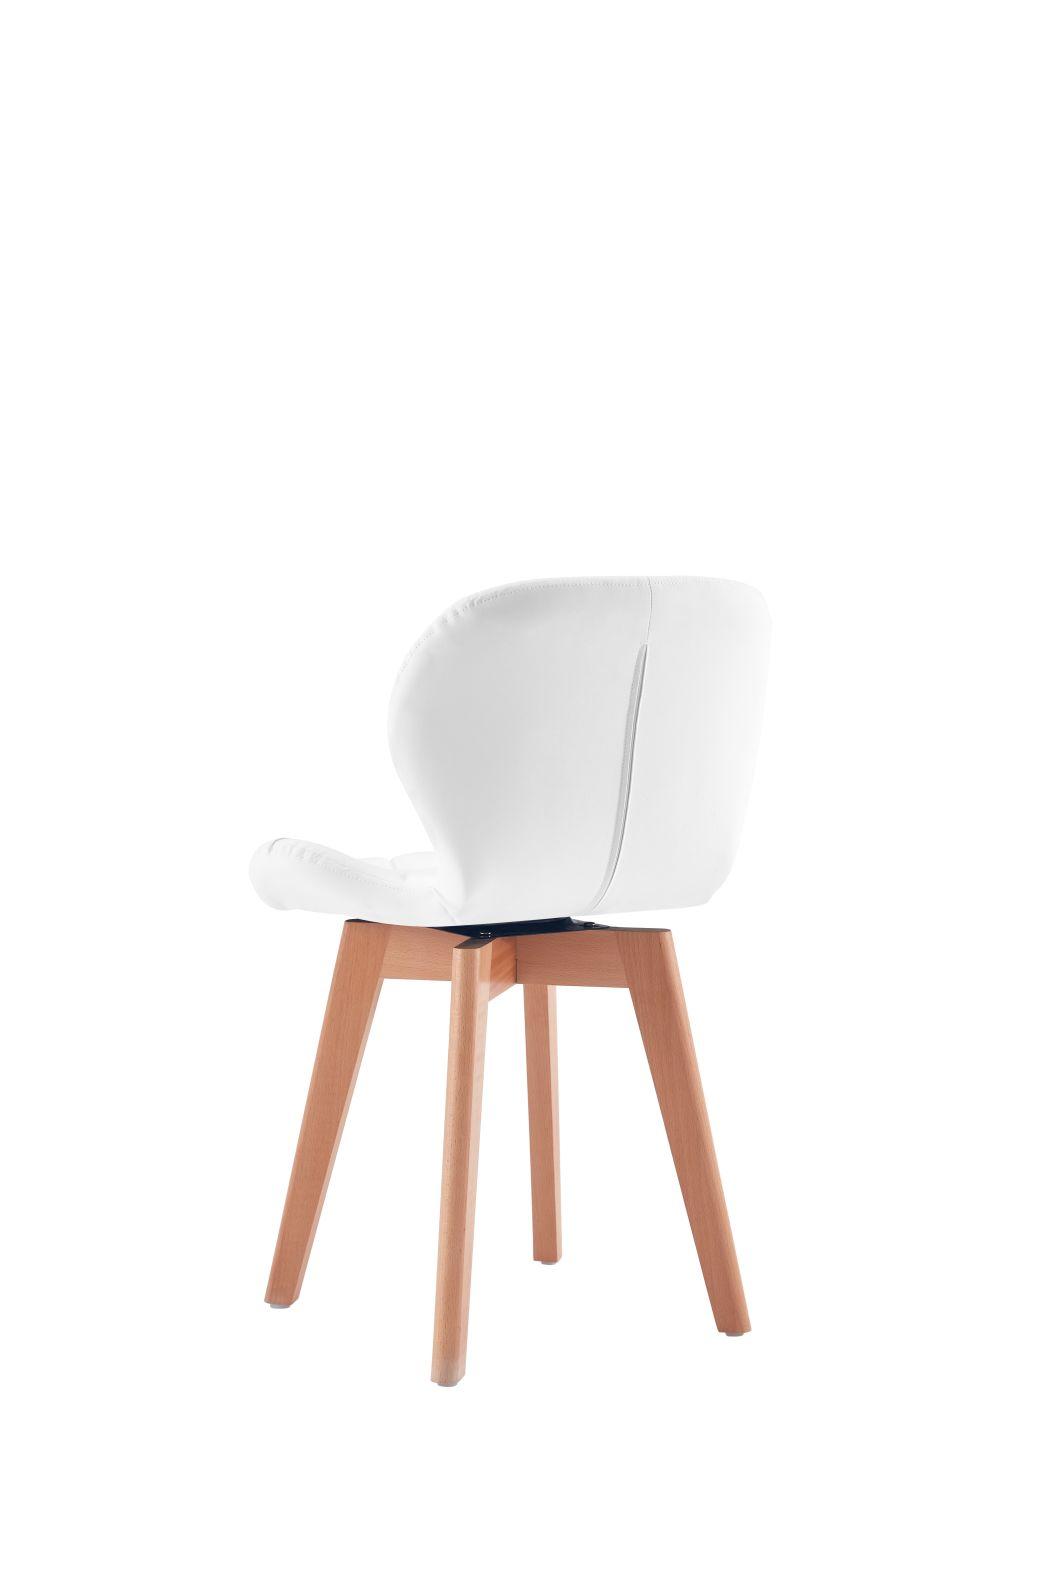 Modern Home Furniture Polypropylene Beech Wood Legs PU Cushion Leather Seat Dining Room Set Nordic Dining Chair